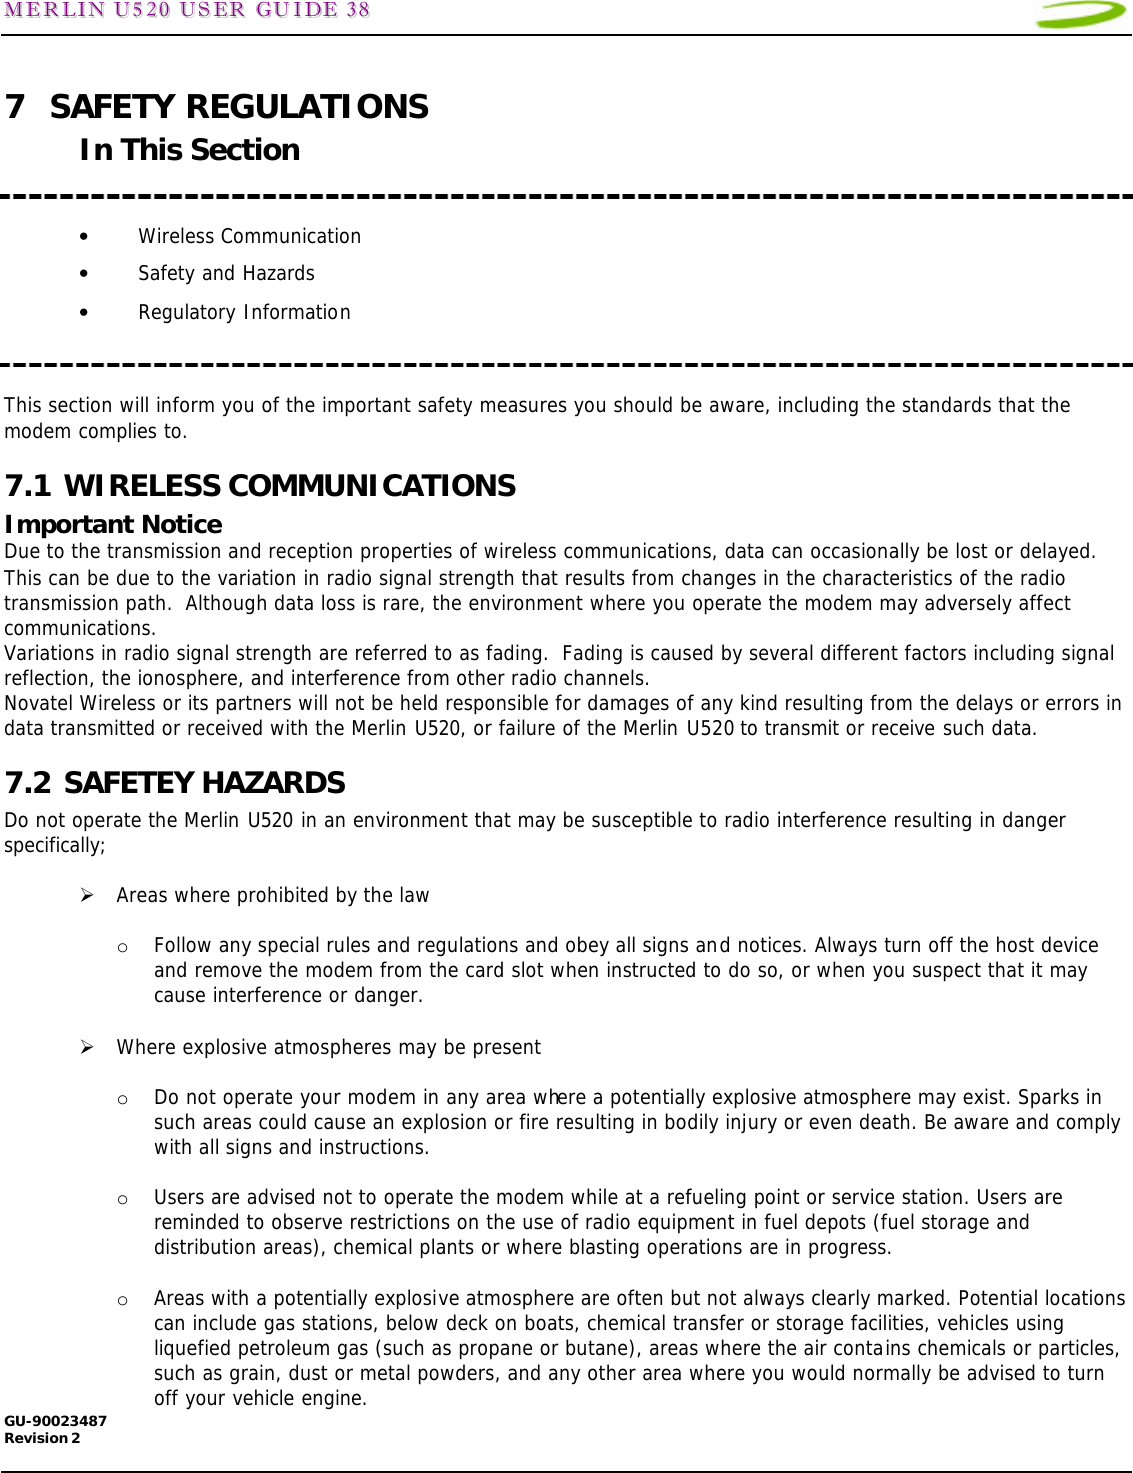 MMEERRLLIINN  UU552200  UUSSEERR  GGUUIIDDEE  3388   GU-90023487 Revision 2   7 SAFETY REGULATIONS In This Section   • Wireless Communication • Safety and Hazards • Regulatory Information   This section will inform you of the important safety measures you should be aware, including the standards that the modem complies to. 7.1 WIRELESS COMMUNICATIONS Important Notice Due to the transmission and reception properties of wireless communications, data can occasionally be lost or delayed.  This can be due to the variation in radio signal strength that results from changes in the characteristics of the radio transmission path.  Although data loss is rare, the environment where you operate the modem may adversely affect communications. Variations in radio signal strength are referred to as fading.  Fading is caused by several different factors including signal reflection, the ionosphere, and interference from other radio channels.  Novatel Wireless or its partners will not be held responsible for damages of any kind resulting from the delays or errors in data transmitted or received with the Merlin U520, or failure of the Merlin U520 to transmit or receive such data. 7.2 SAFETEY HAZARDS Do not operate the Merlin U520 in an environment that may be susceptible to radio interference resulting in danger specifically;  Ø Areas where prohibited by the law  o Follow any special rules and regulations and obey all signs and notices. Always turn off the host device and remove the modem from the card slot when instructed to do so, or when you suspect that it may cause interference or danger.  Ø Where explosive atmospheres may be present  o Do not operate your modem in any area where a potentially explosive atmosphere may exist. Sparks in such areas could cause an explosion or fire resulting in bodily injury or even death. Be aware and comply with all signs and instructions.  o Users are advised not to operate the modem while at a refueling point or service station. Users are reminded to observe restrictions on the use of radio equipment in fuel depots (fuel storage and distribution areas), chemical plants or where blasting operations are in progress.  o Areas with a potentially explosive atmosphere are often but not always clearly marked. Potential locations can include gas stations, below deck on boats, chemical transfer or storage facilities, vehicles using liquefied petroleum gas (such as propane or butane), areas where the air contains chemicals or particles, such as grain, dust or metal powders, and any other area where you would normally be advised to turn off your vehicle engine. 